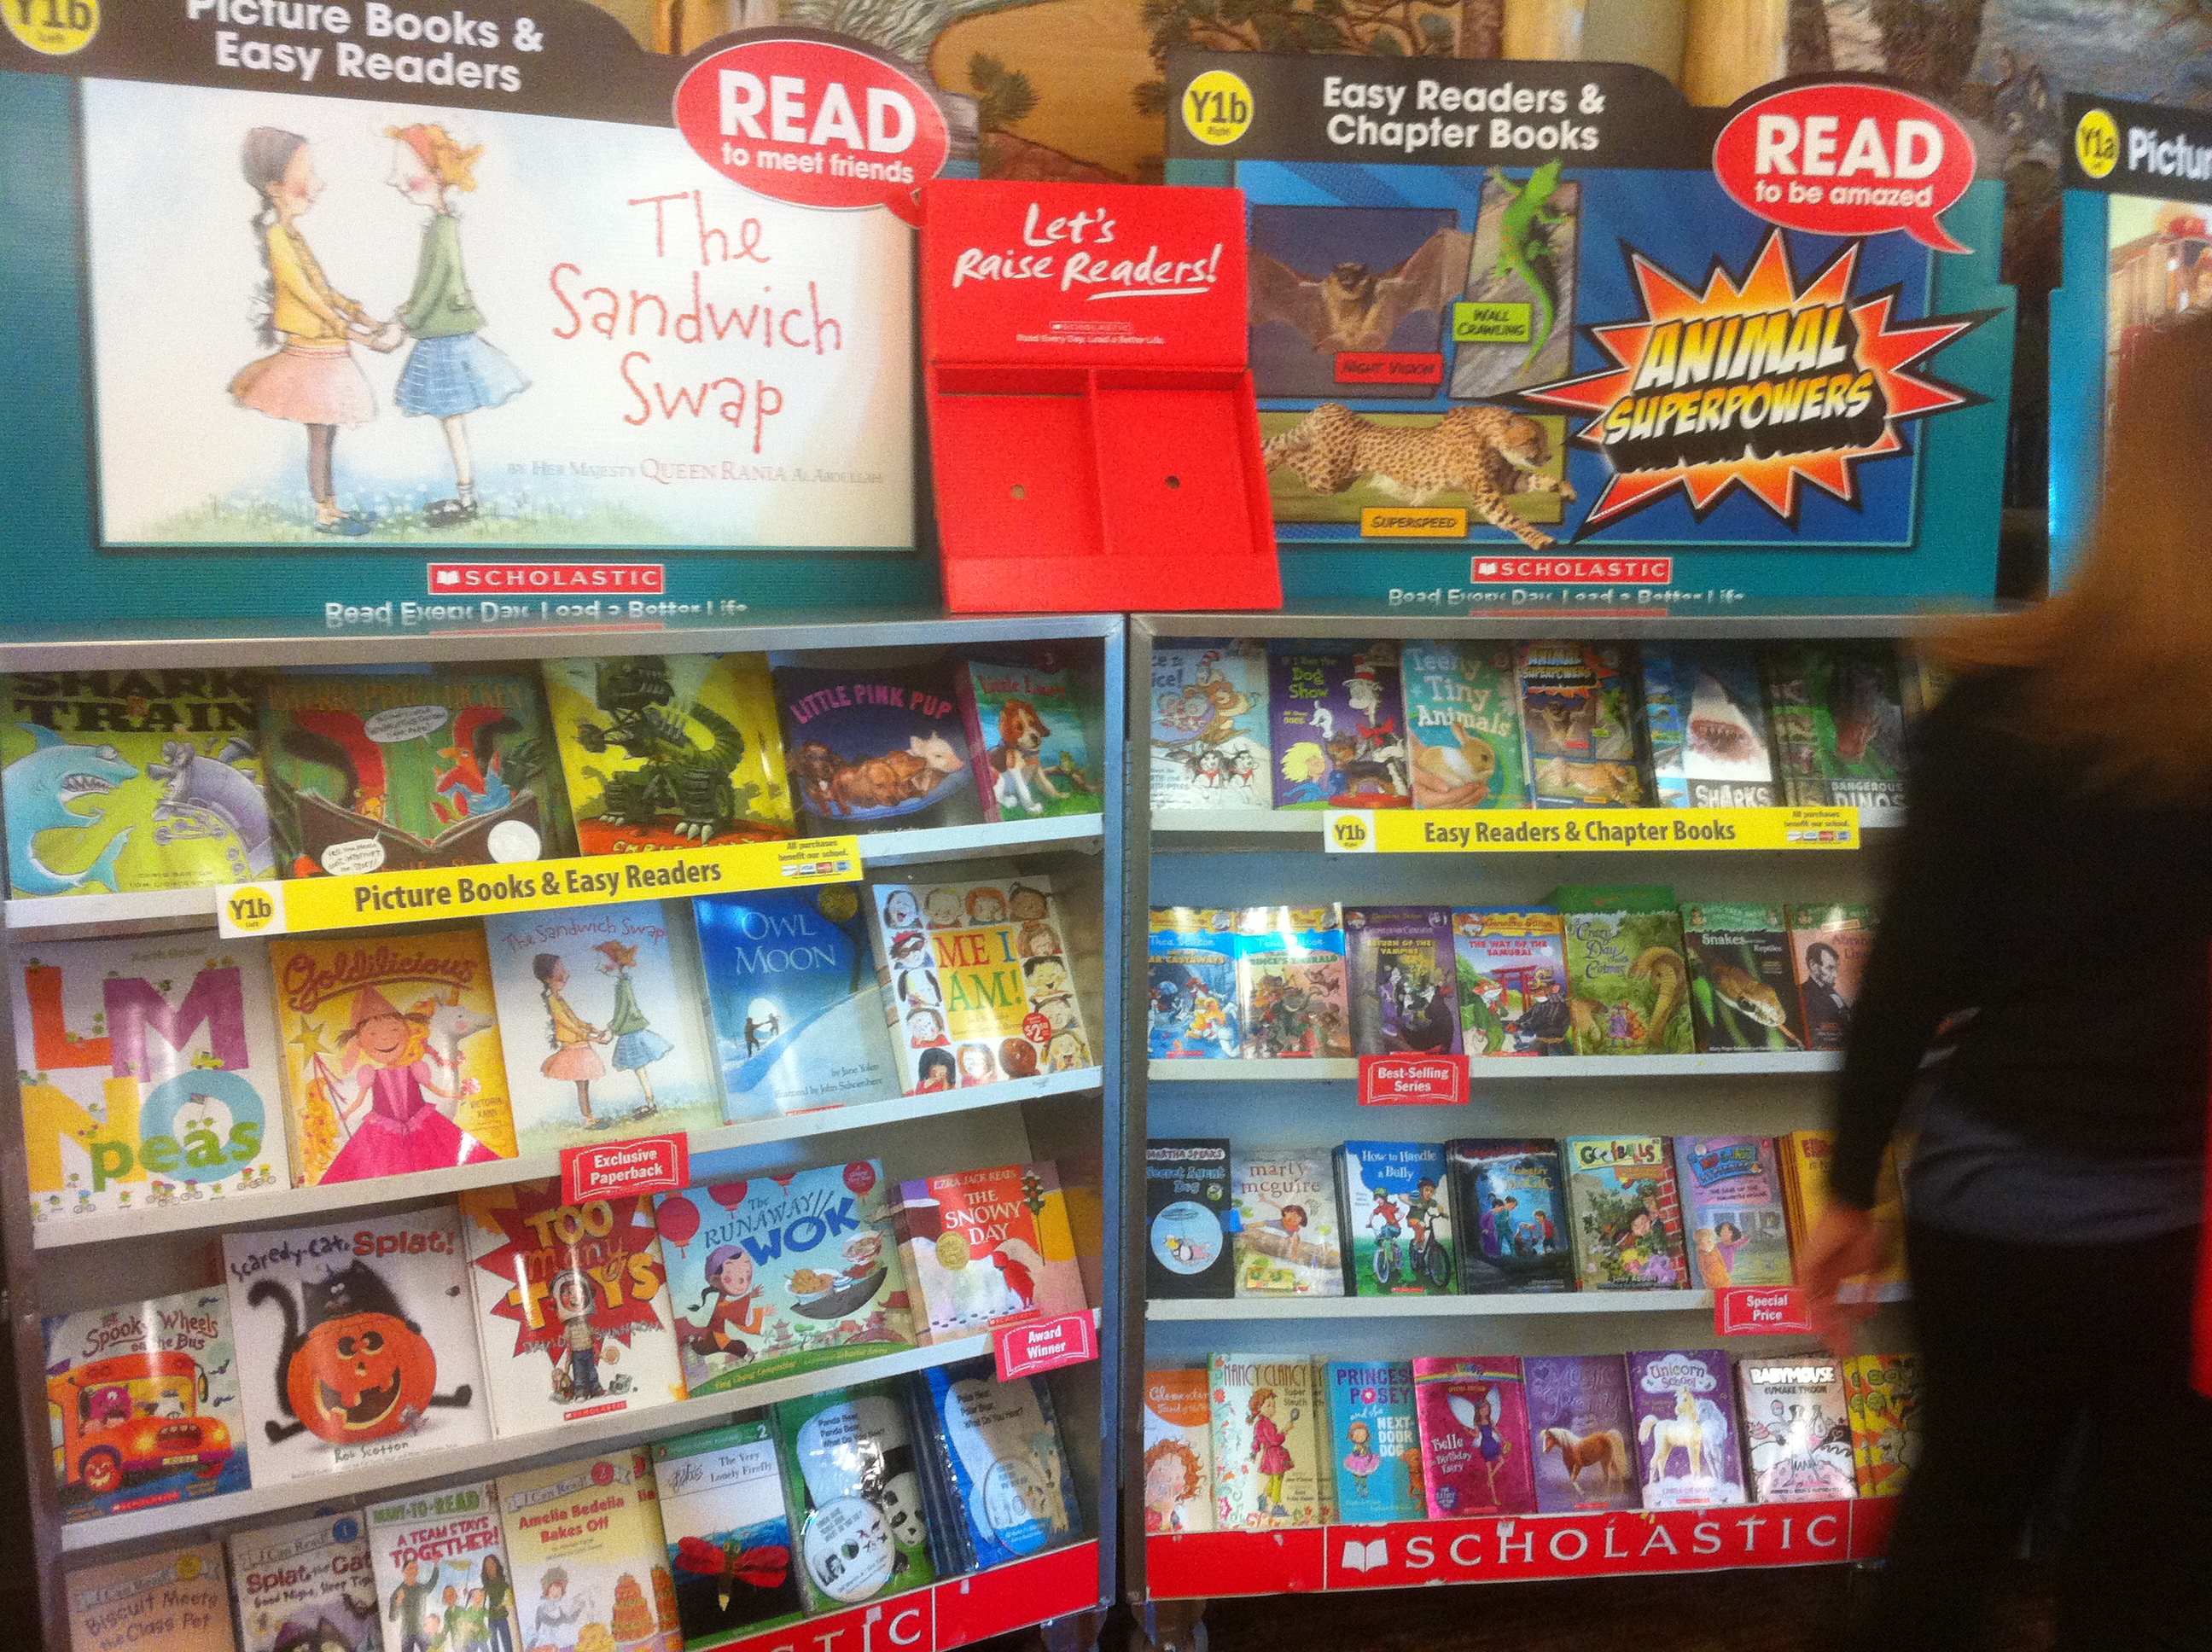 Kate Messner's Blog - Thank you, Scholastic Book Fairs! - August 17, 2012  07:58